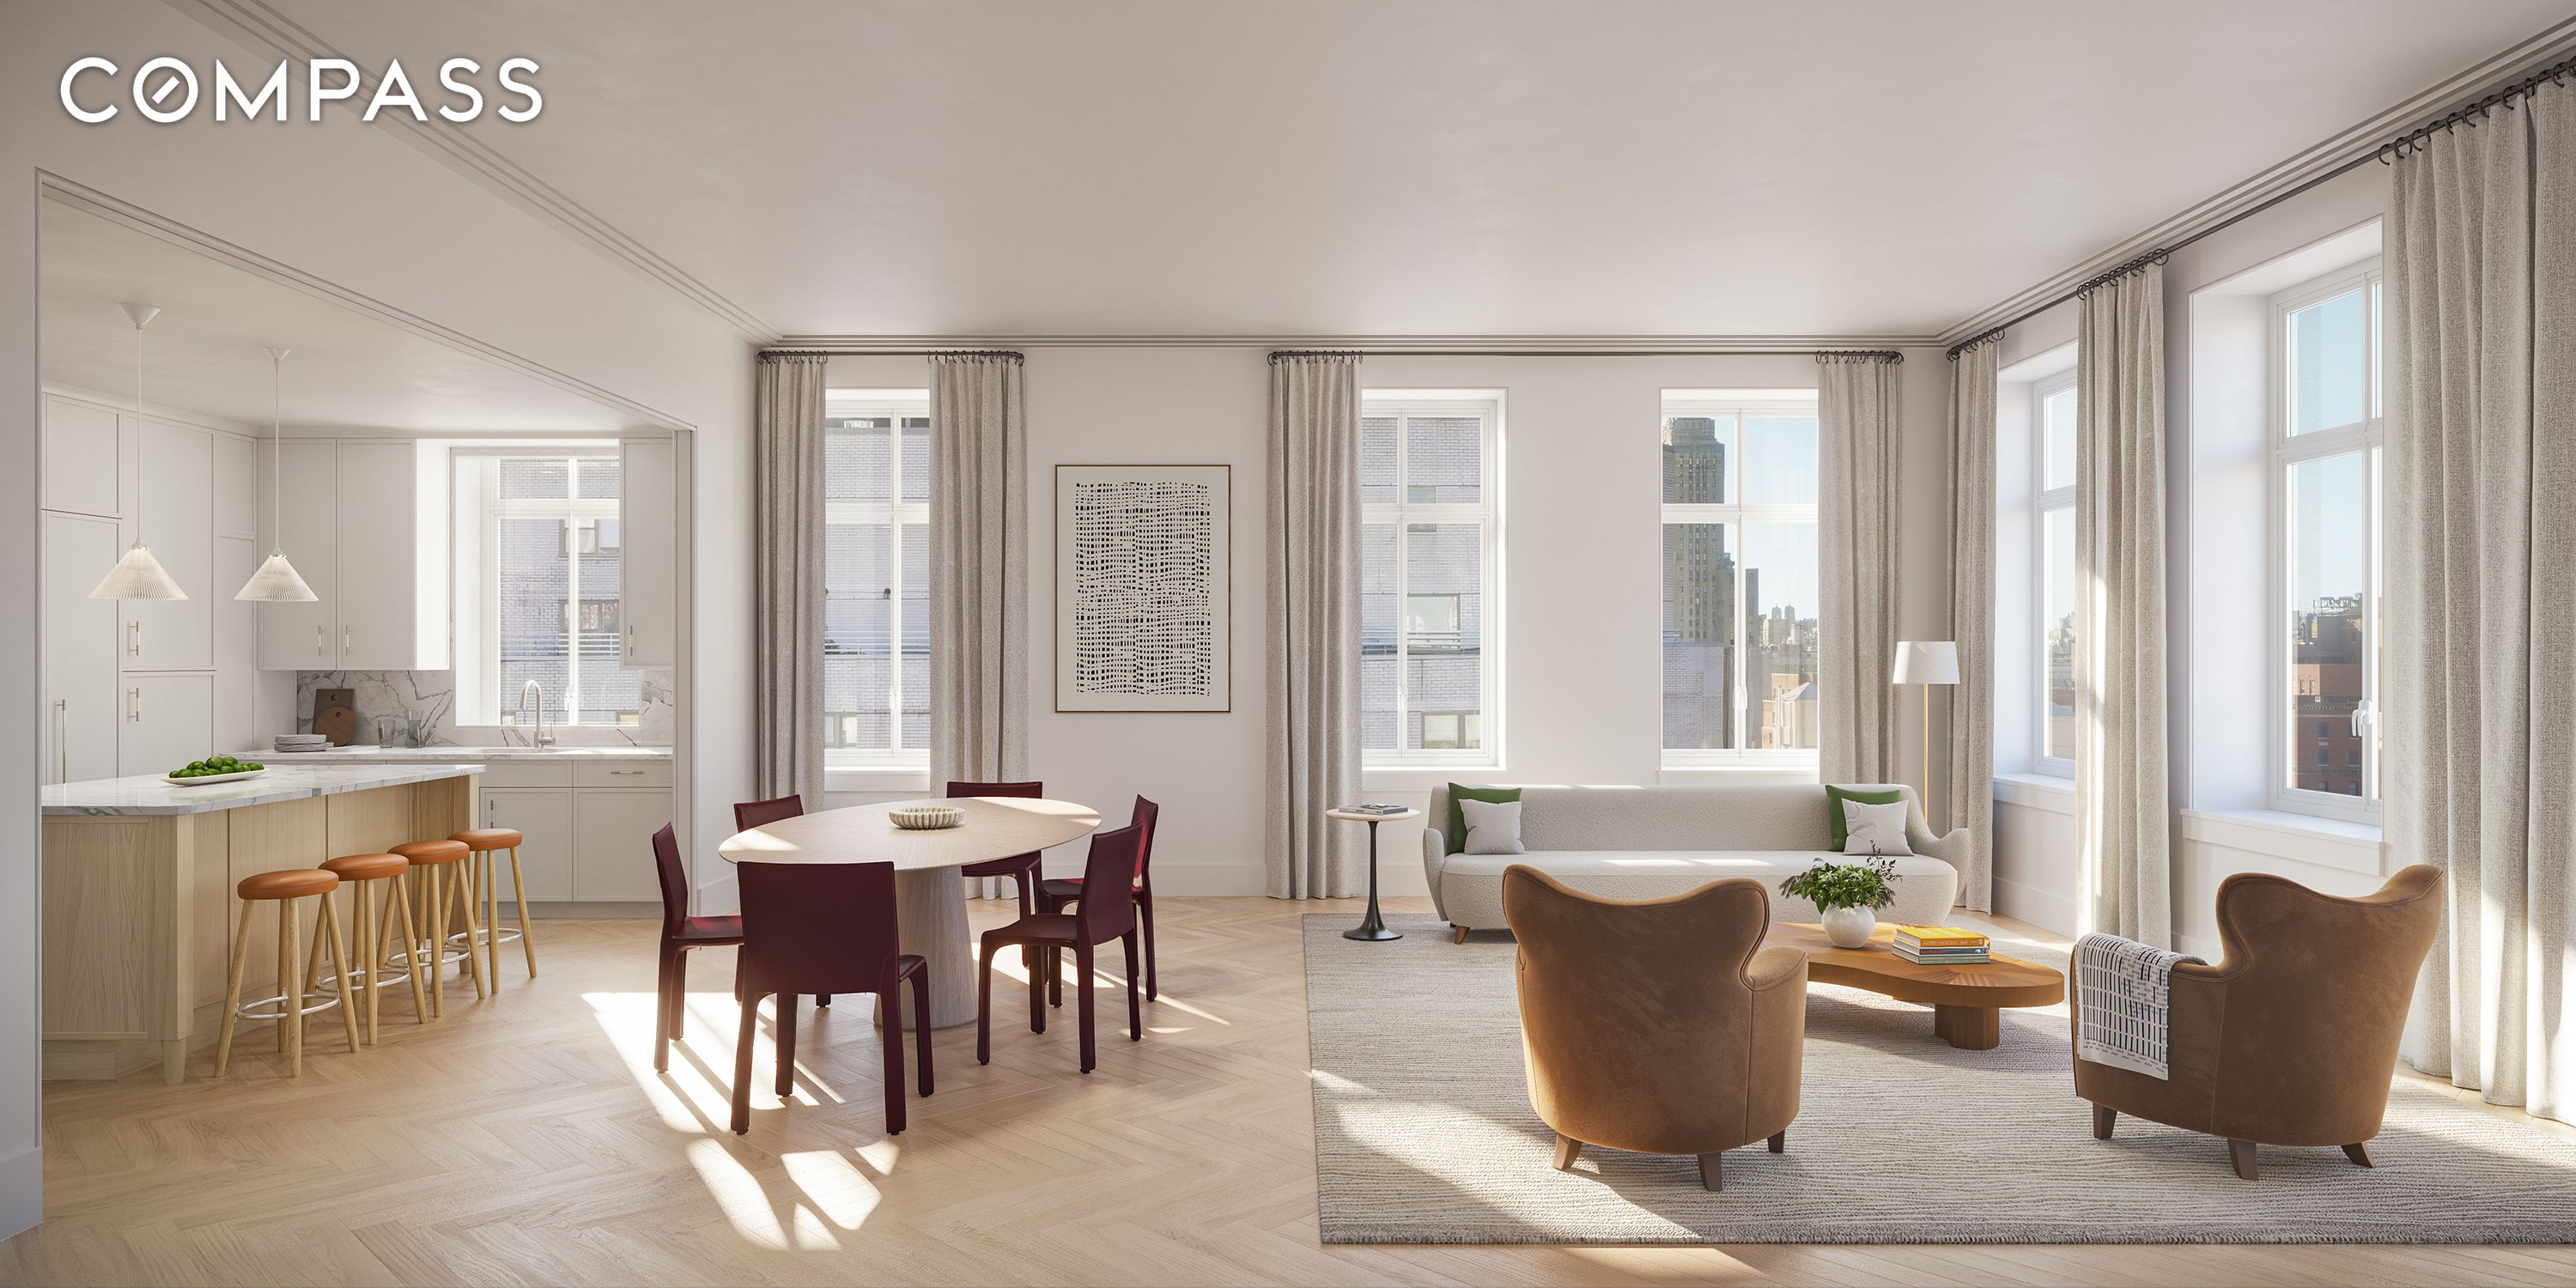 200 East 75th Street 4A, Lenox Hill, Upper East Side, NYC - 4 Bedrooms  
4.5 Bathrooms  
8 Rooms - 